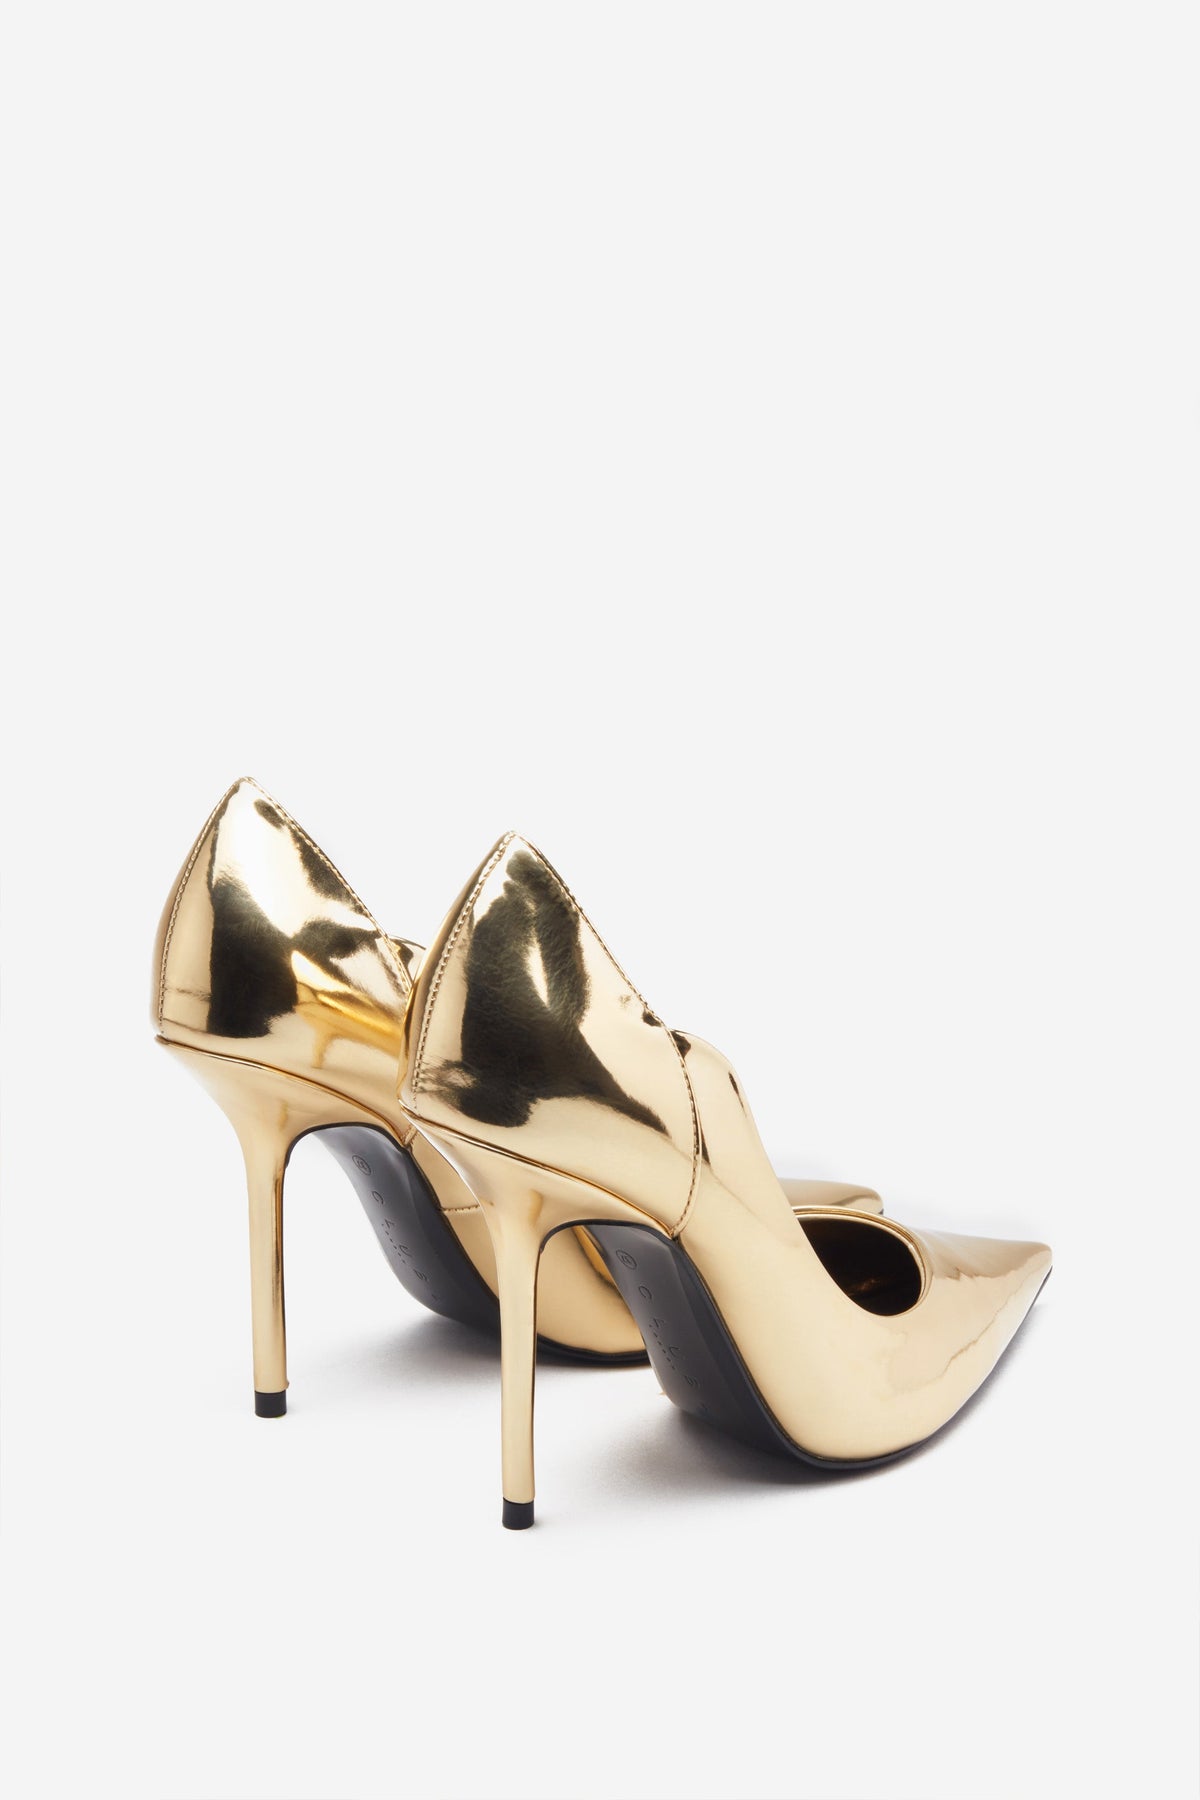 Gold Glitter Evening Women Heel Shoes Selling Fast at Pantaloons.com